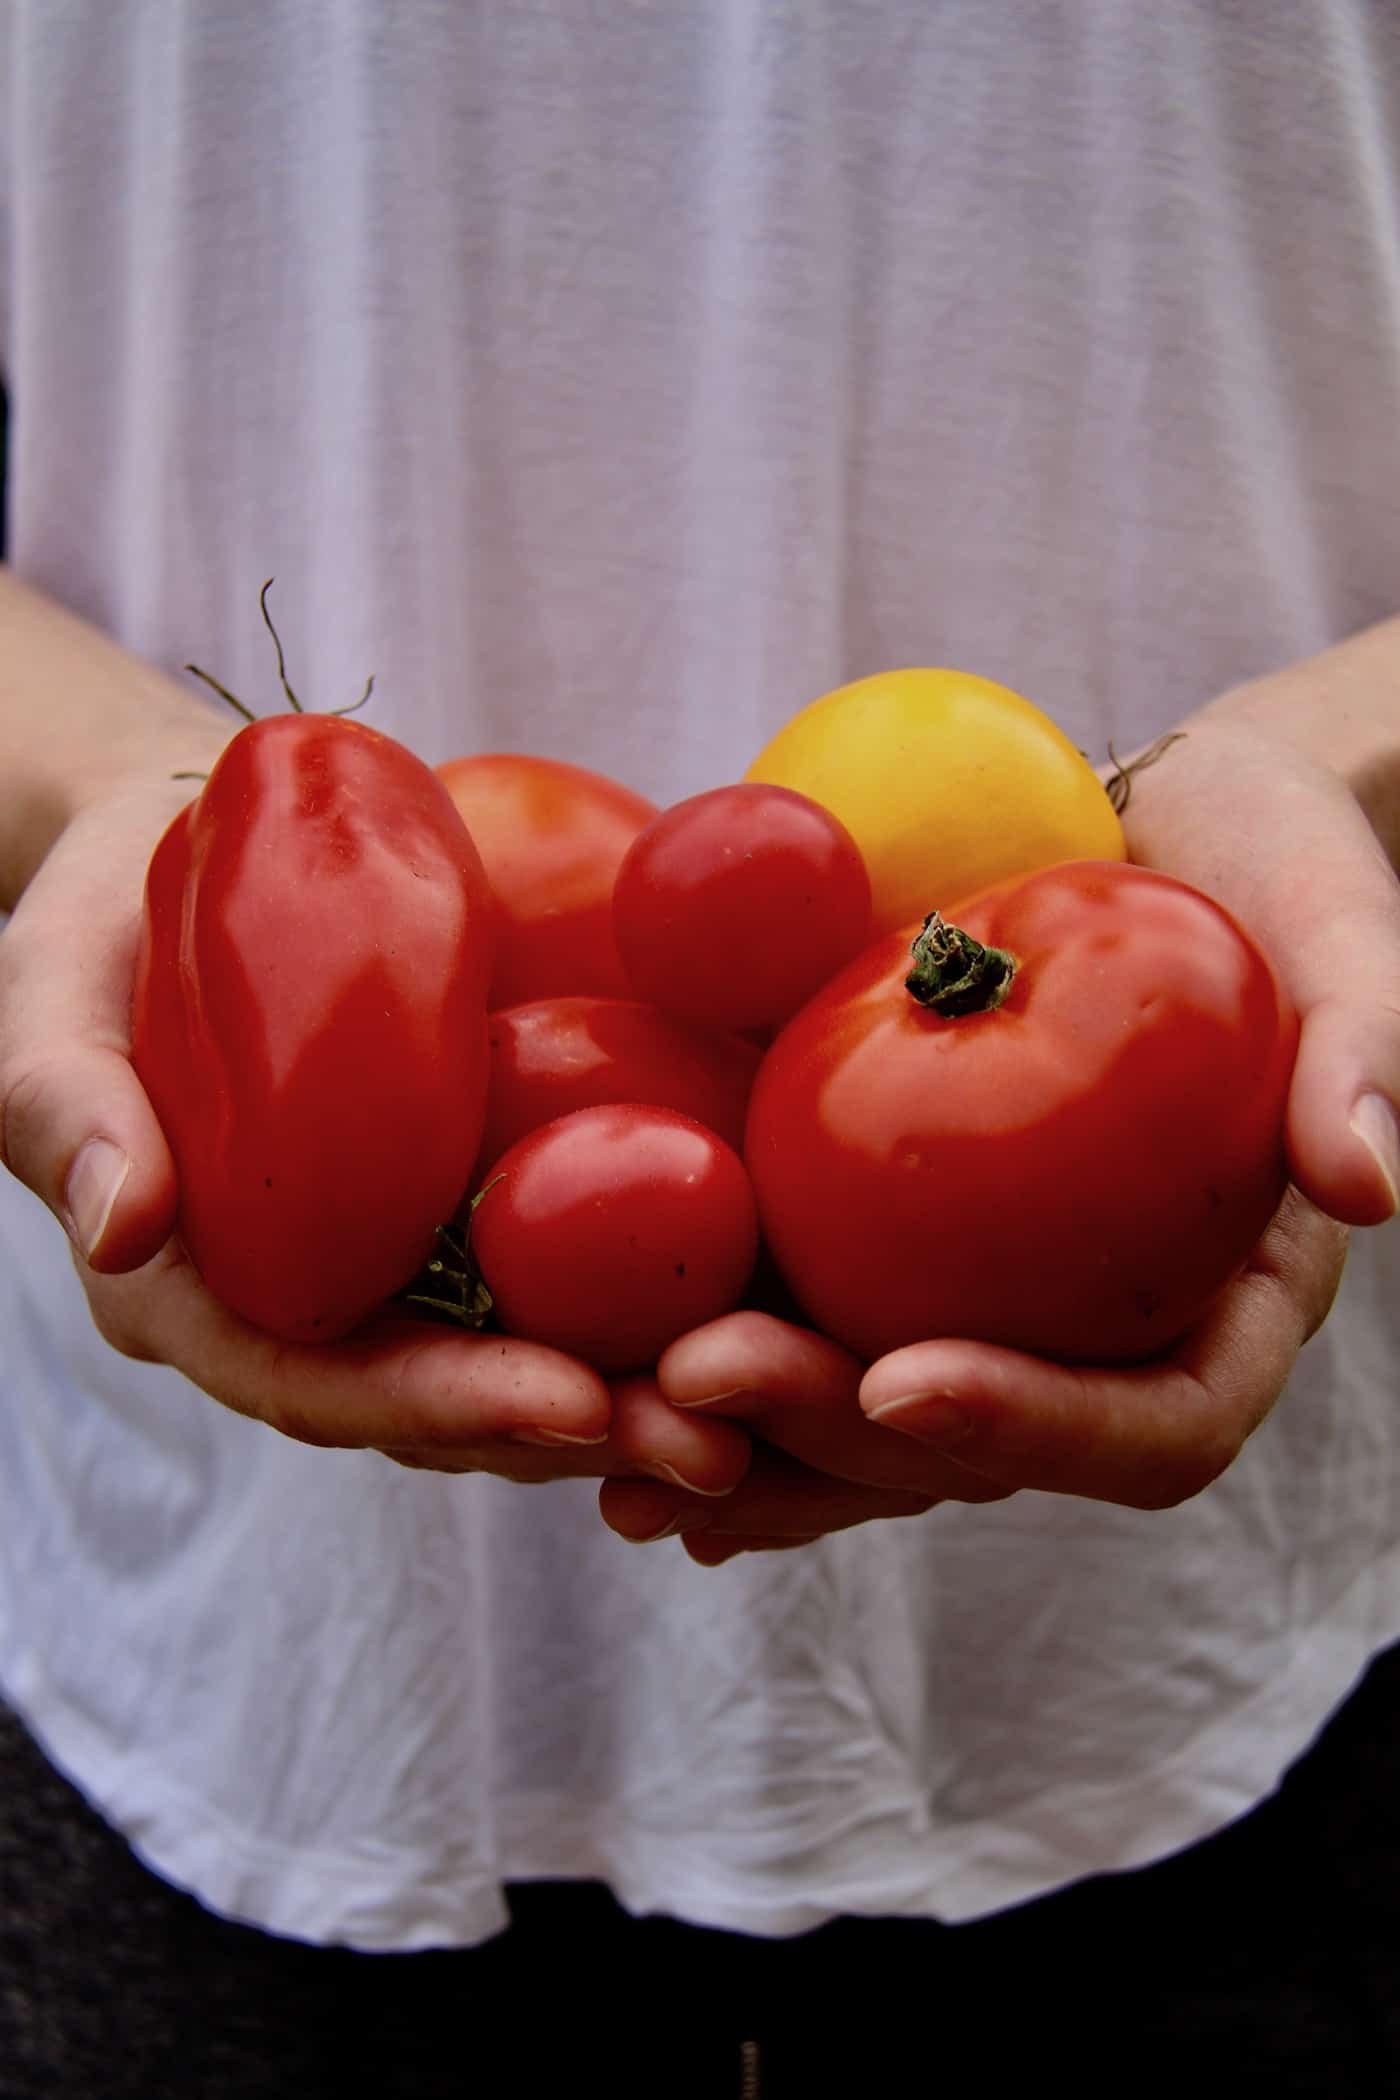 Most flavorful heirloom tomato cultivars